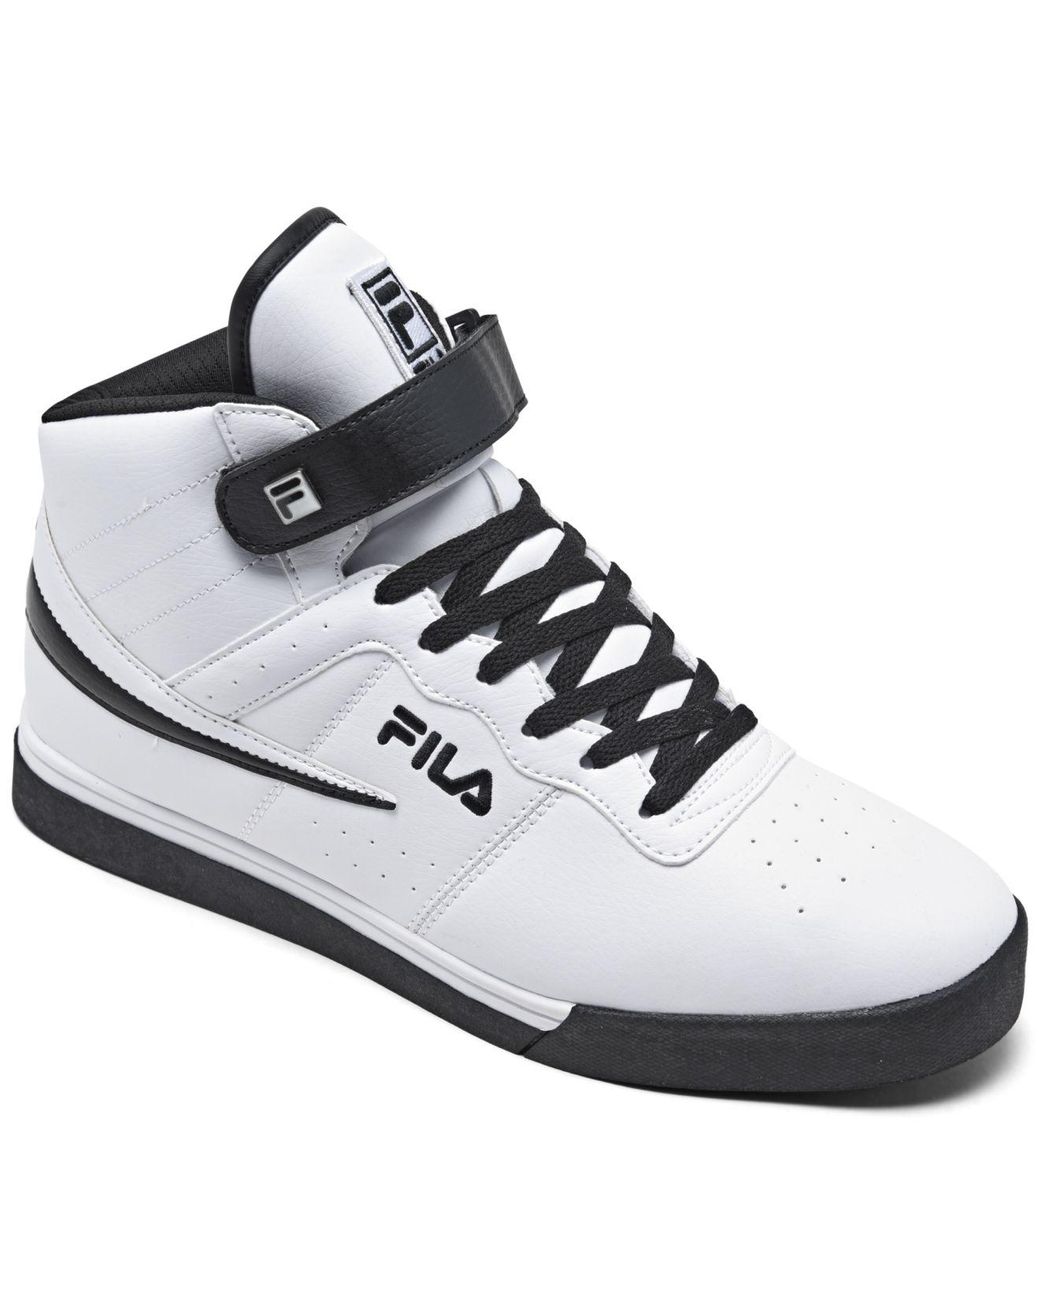 Fila Synthetic Vulc 13 Slip-resistant Casual Work Sneakers From Finish ...